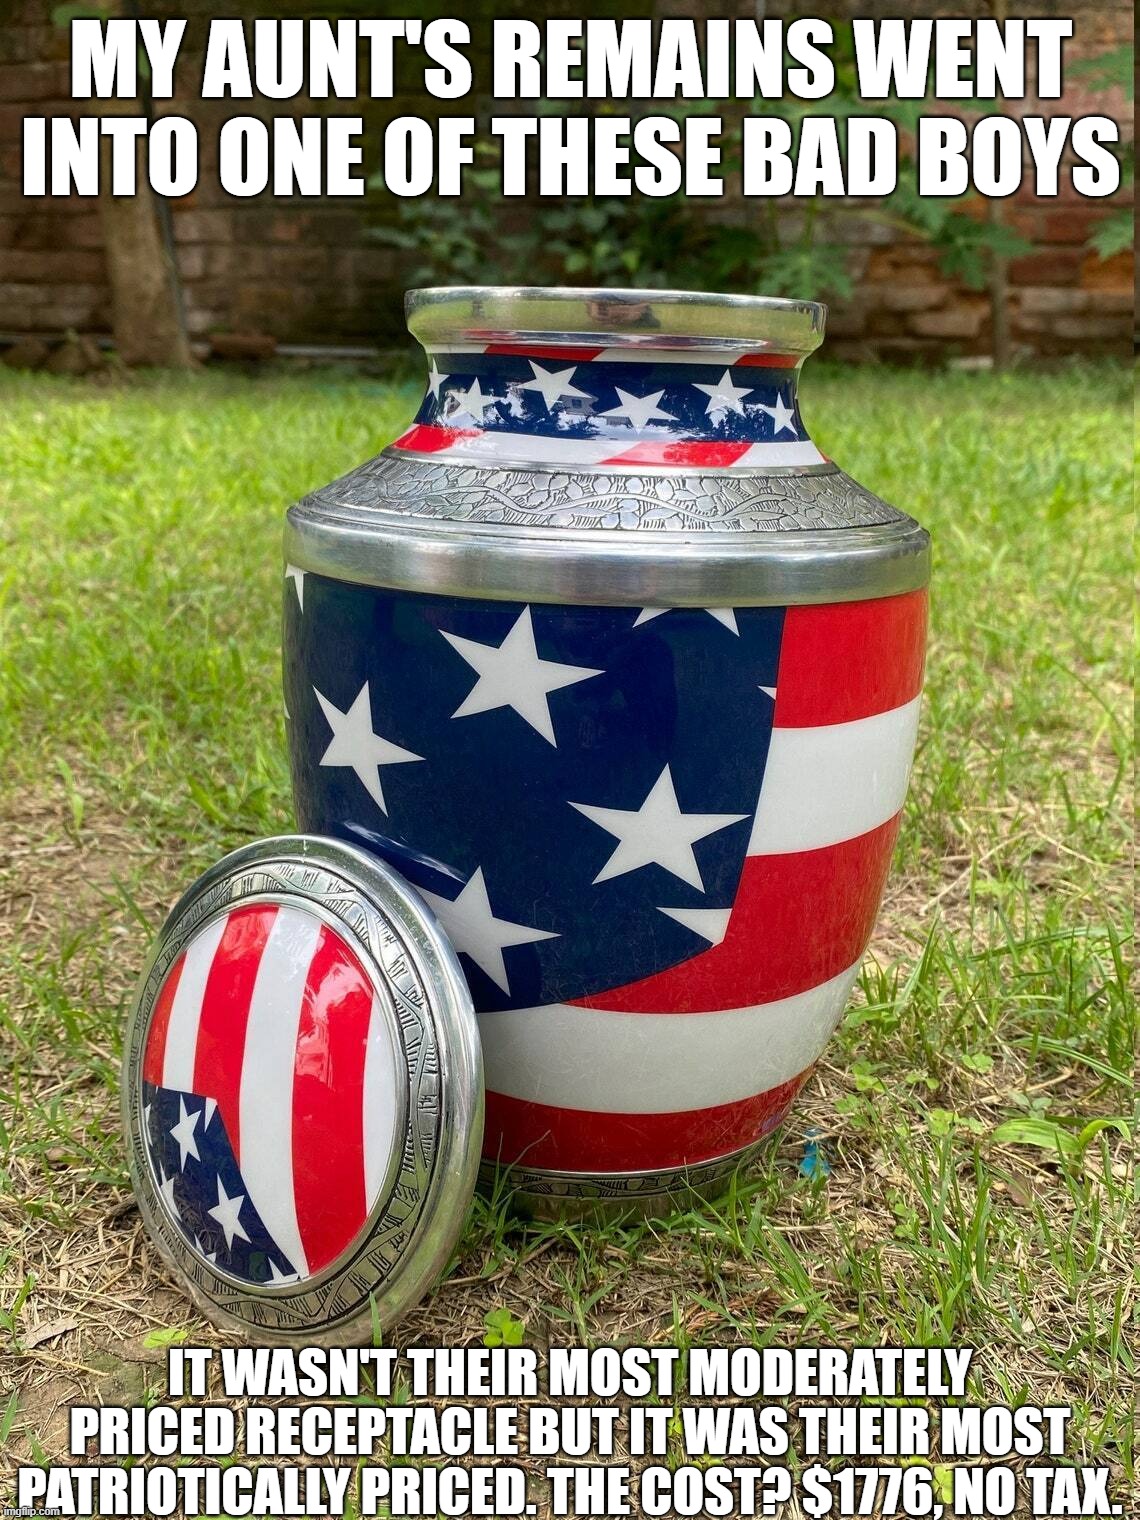 Patriotic Urn | MY AUNT'S REMAINS WENT INTO ONE OF THESE BAD BOYS; IT WASN'T THEIR MOST MODERATELY PRICED RECEPTACLE BUT IT WAS THEIR MOST PATRIOTICALLY PRICED. THE COST? $1776, NO TAX. | image tagged in patriot,burial,cremation | made w/ Imgflip meme maker